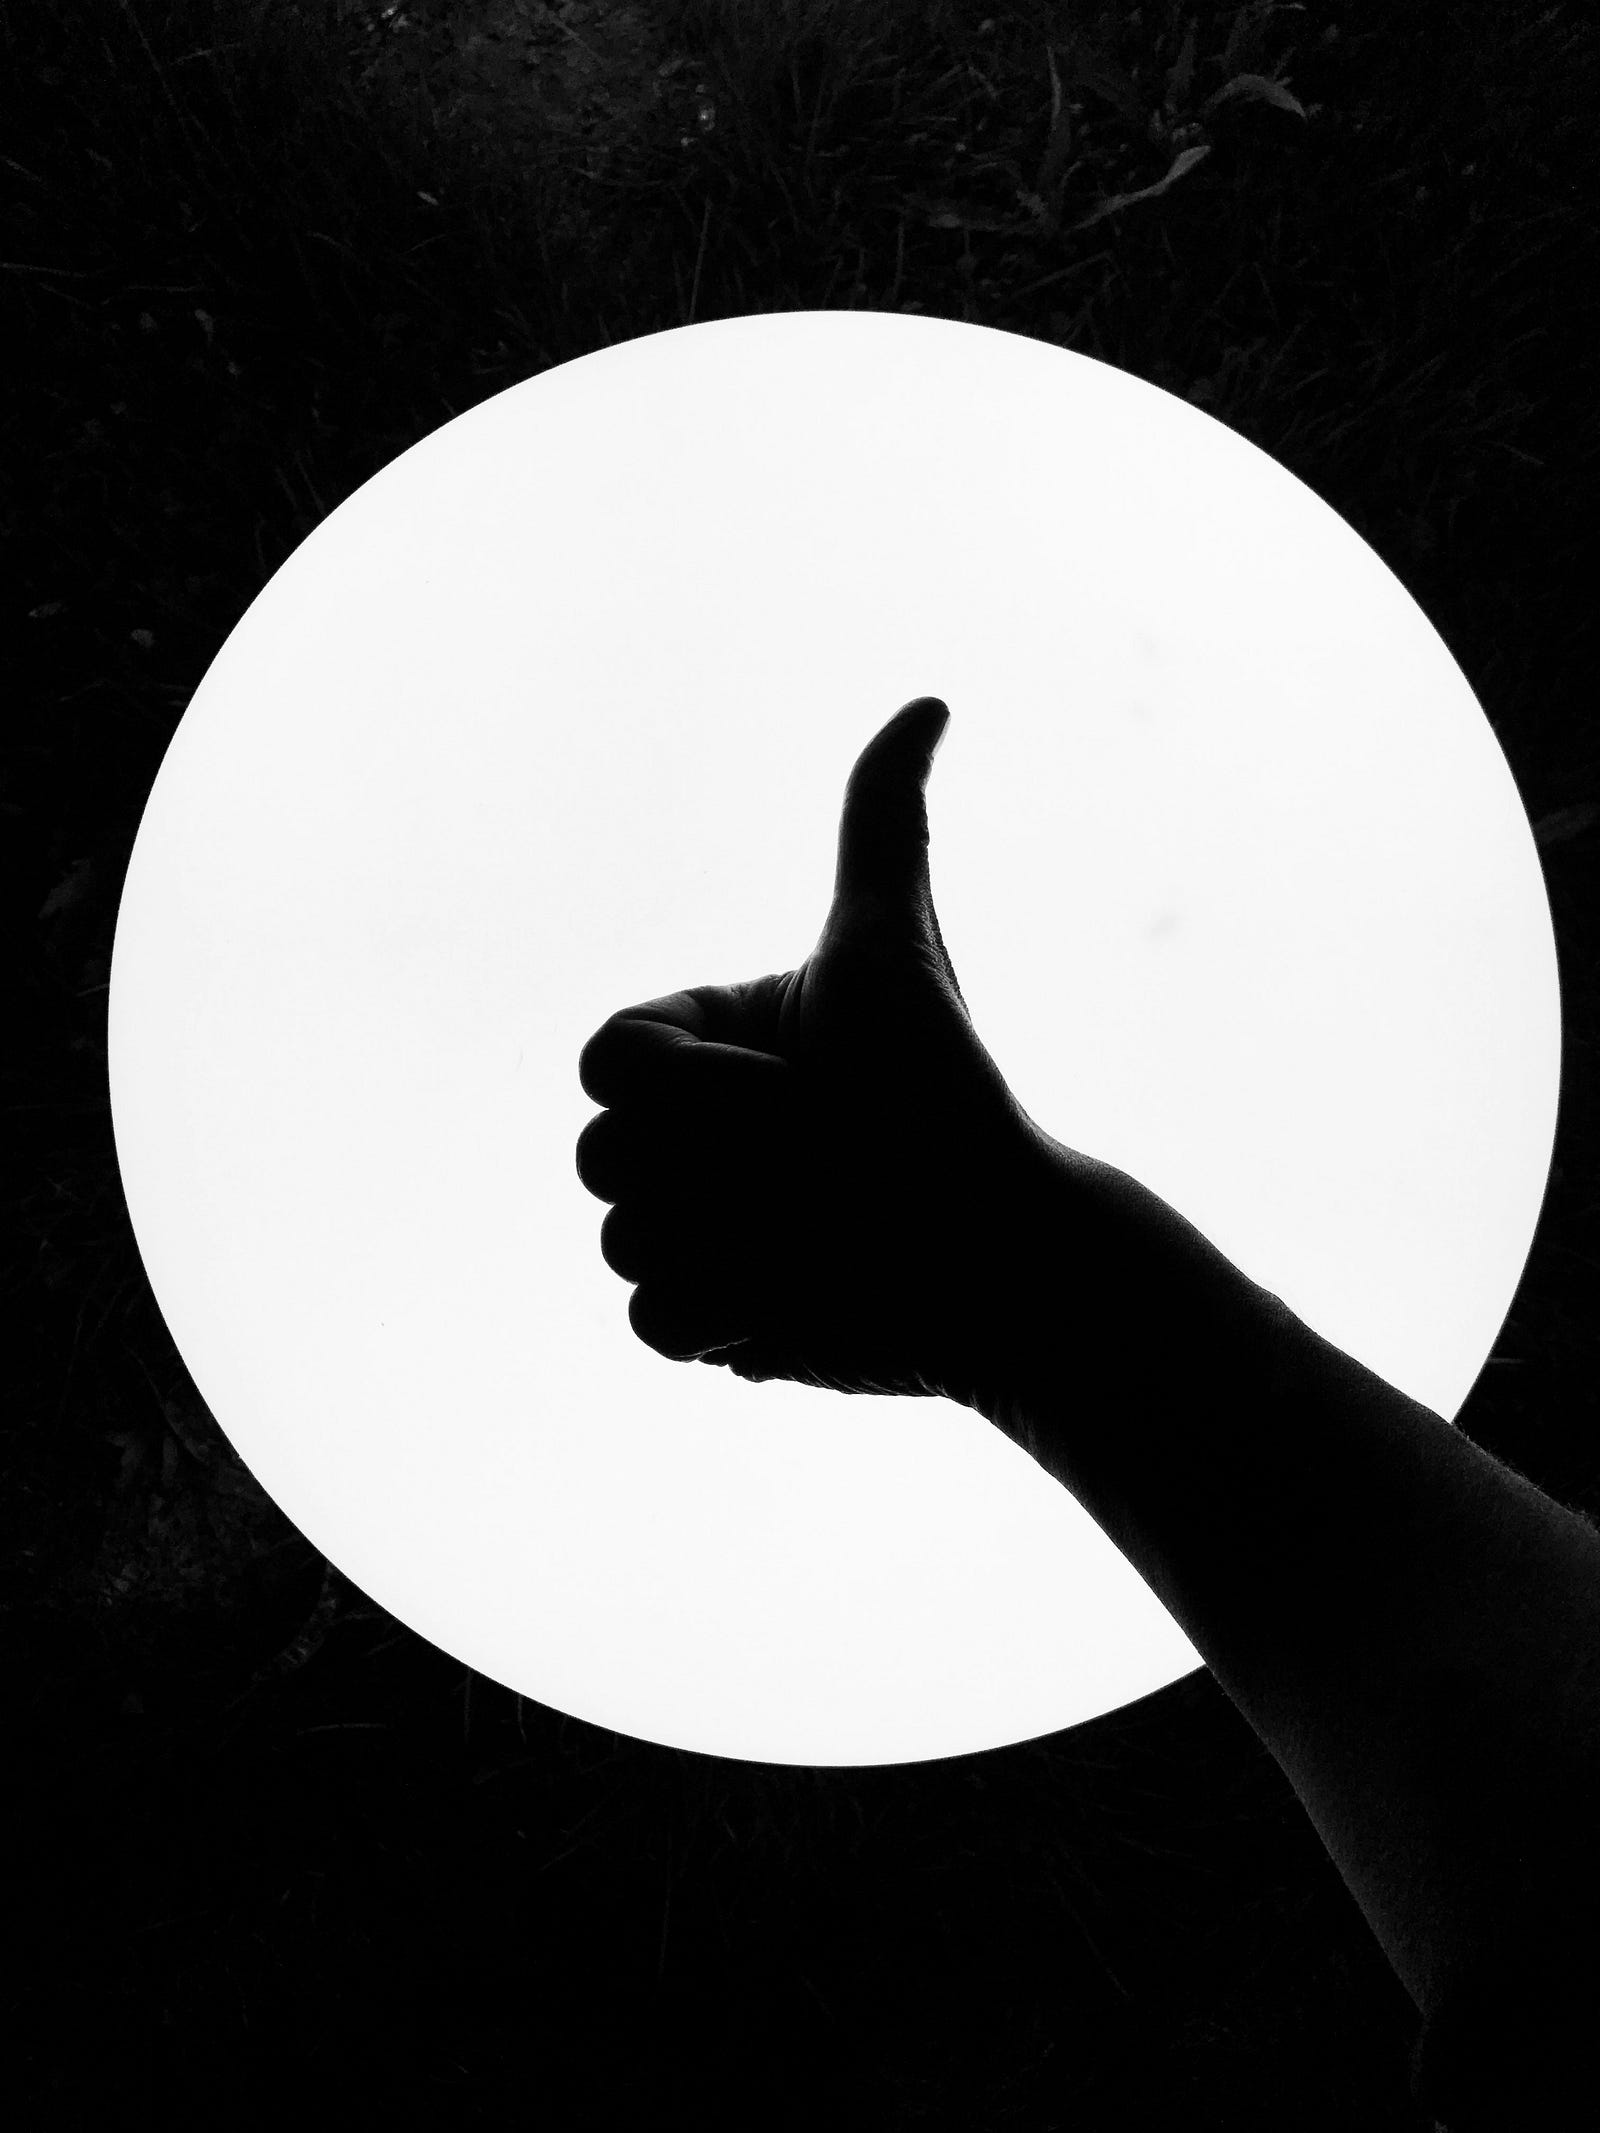 An arm extends from the bottom left to show a thumbs up.